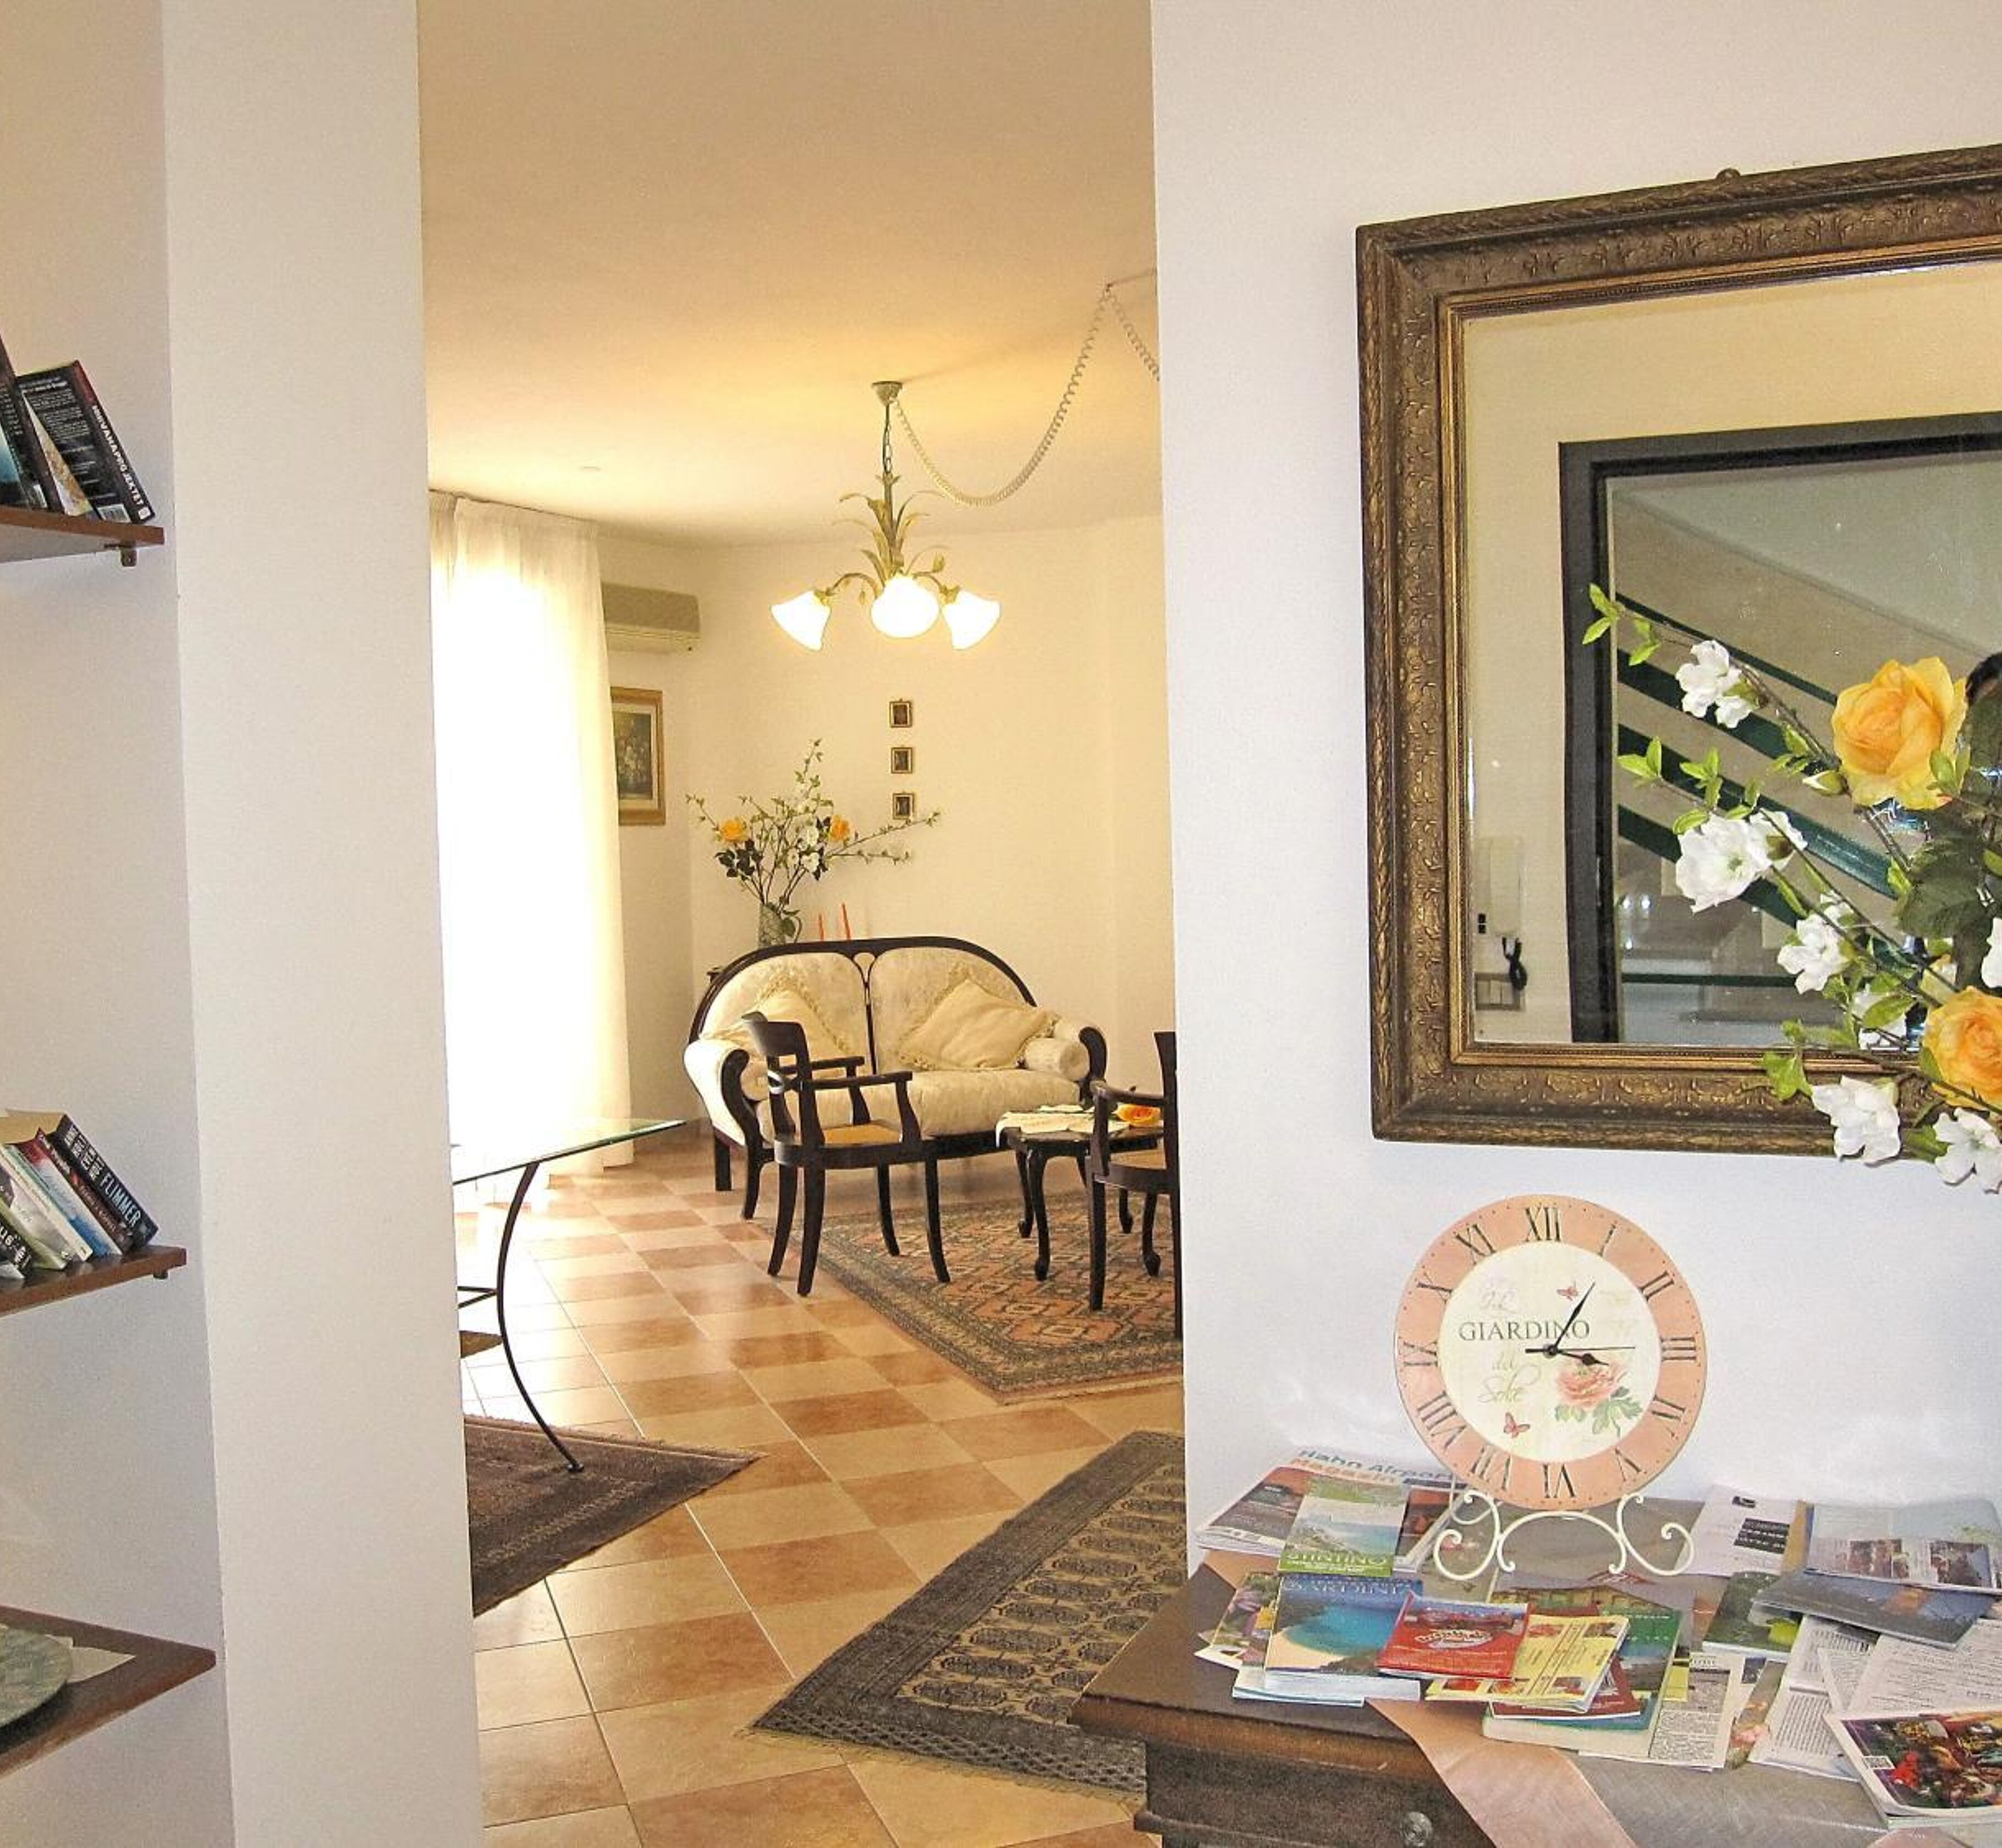 Magralù Bed and Breakfast